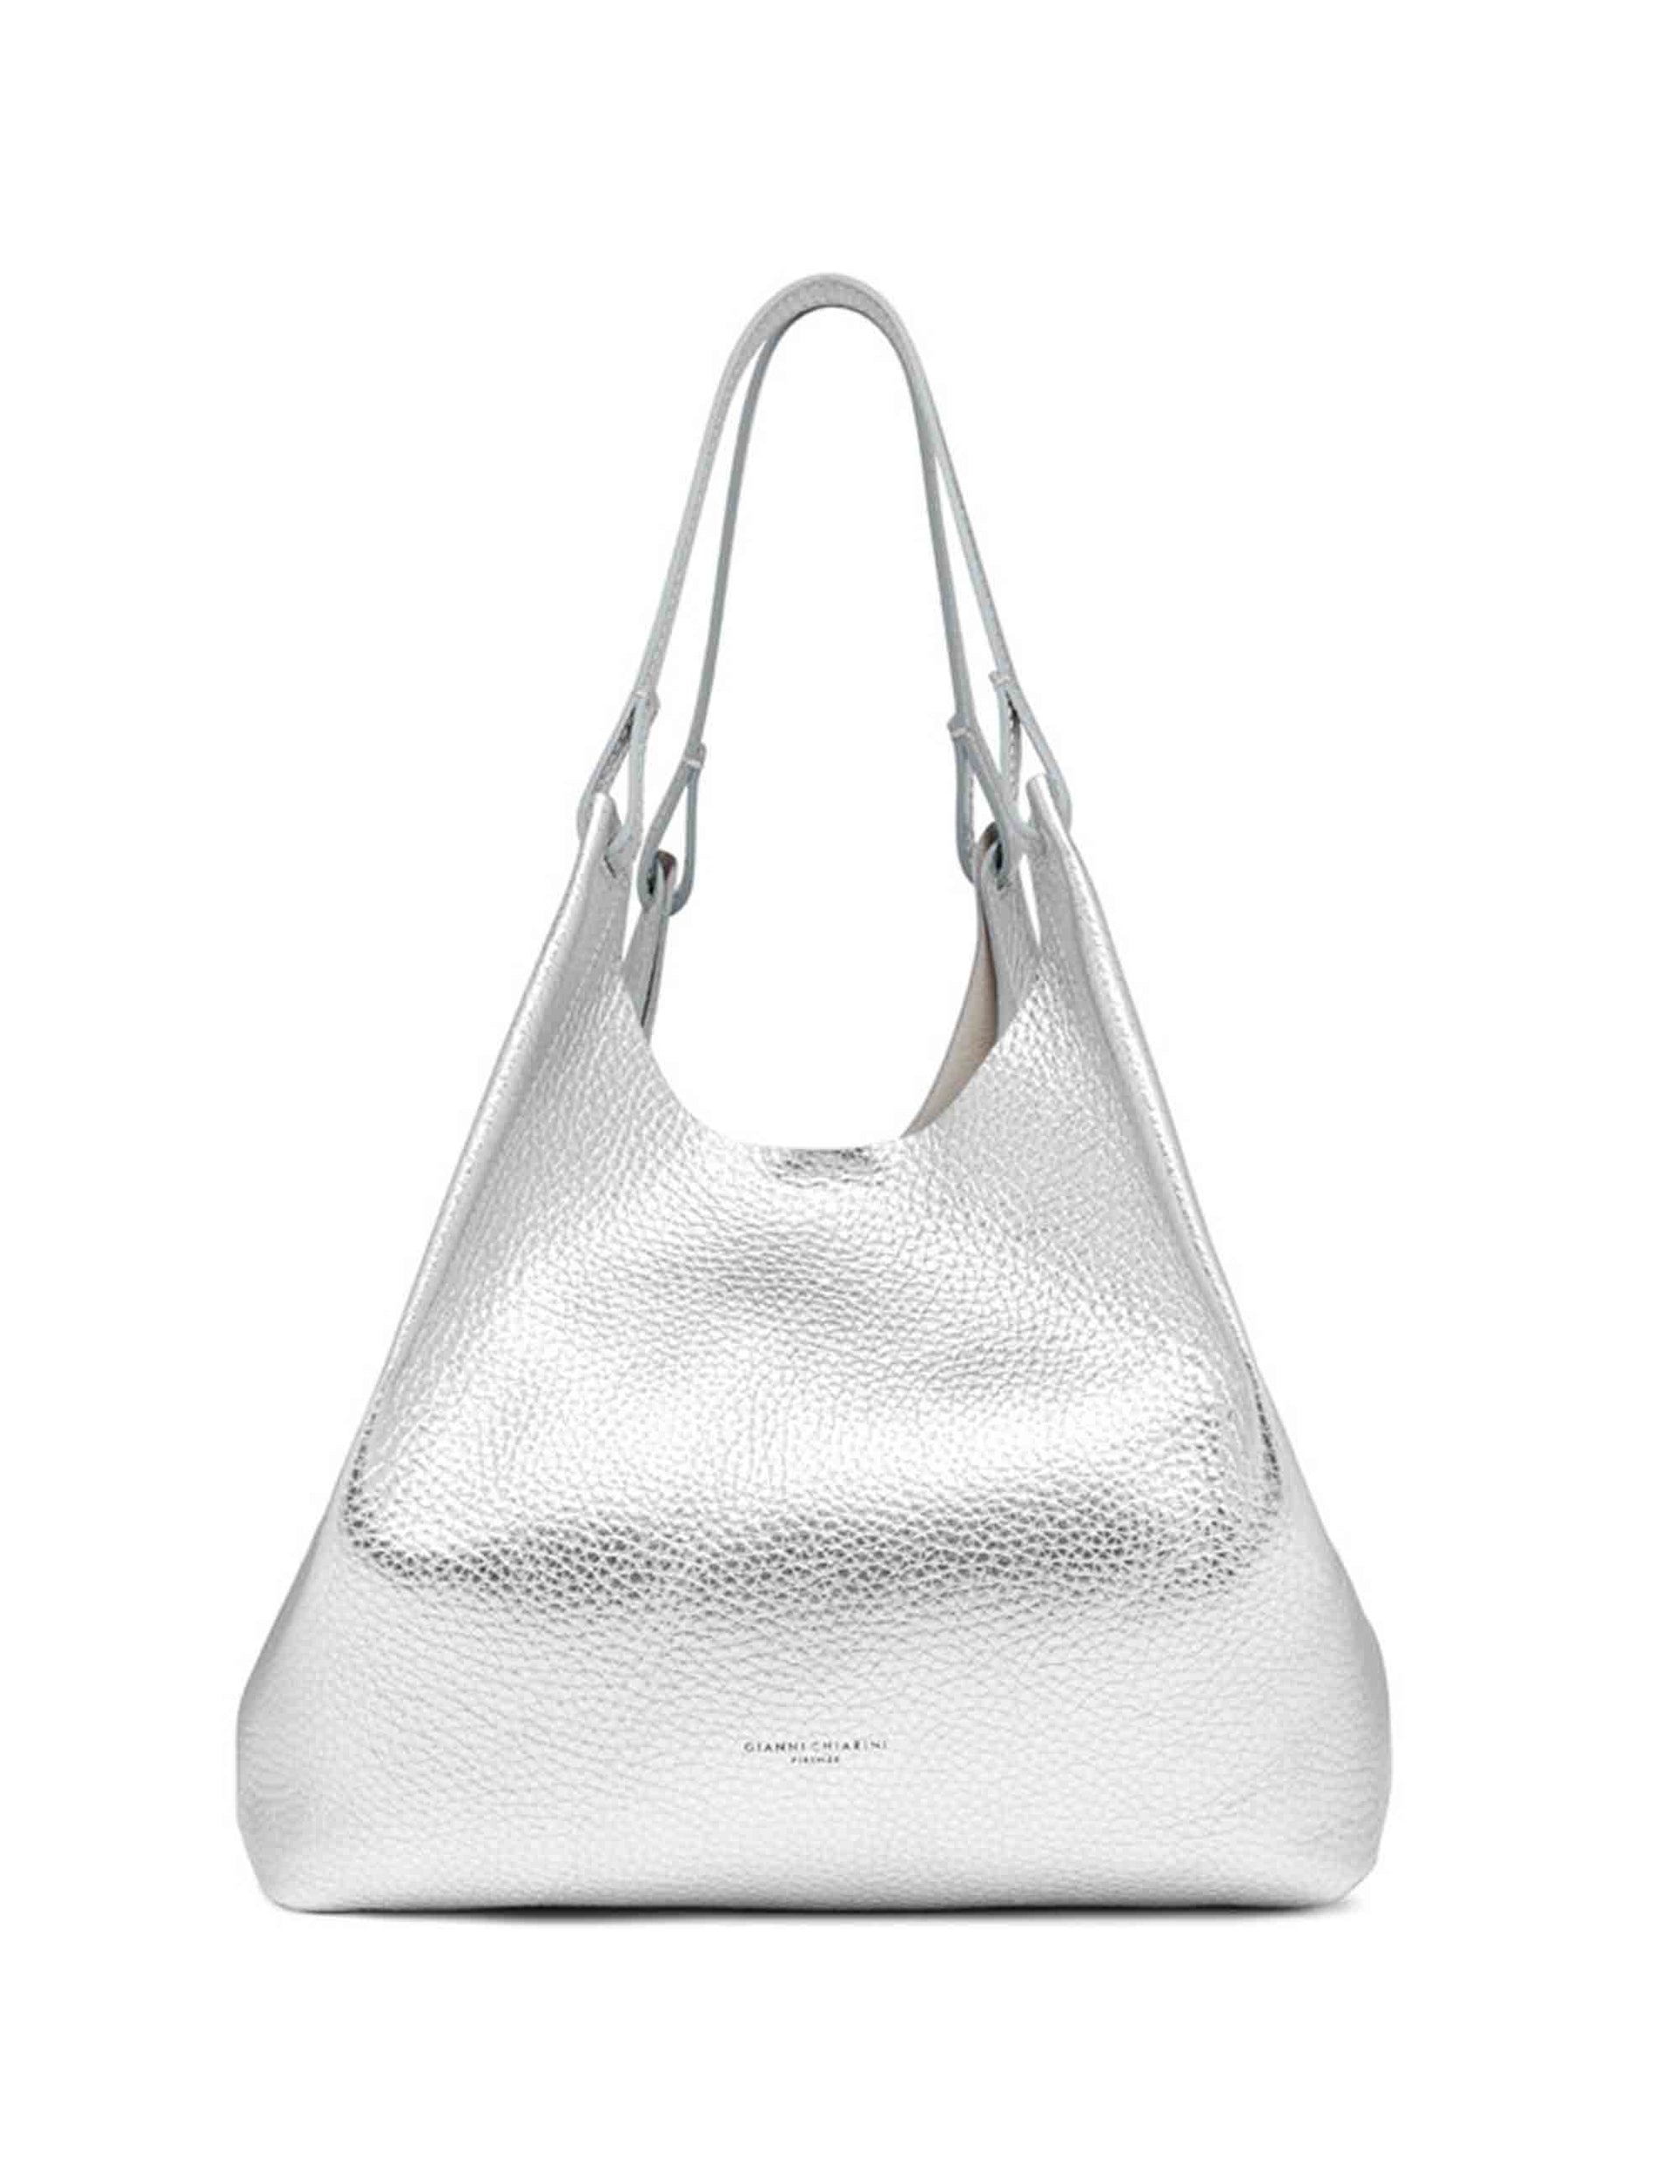 Dua women's shopping bags in silver leather with double handles